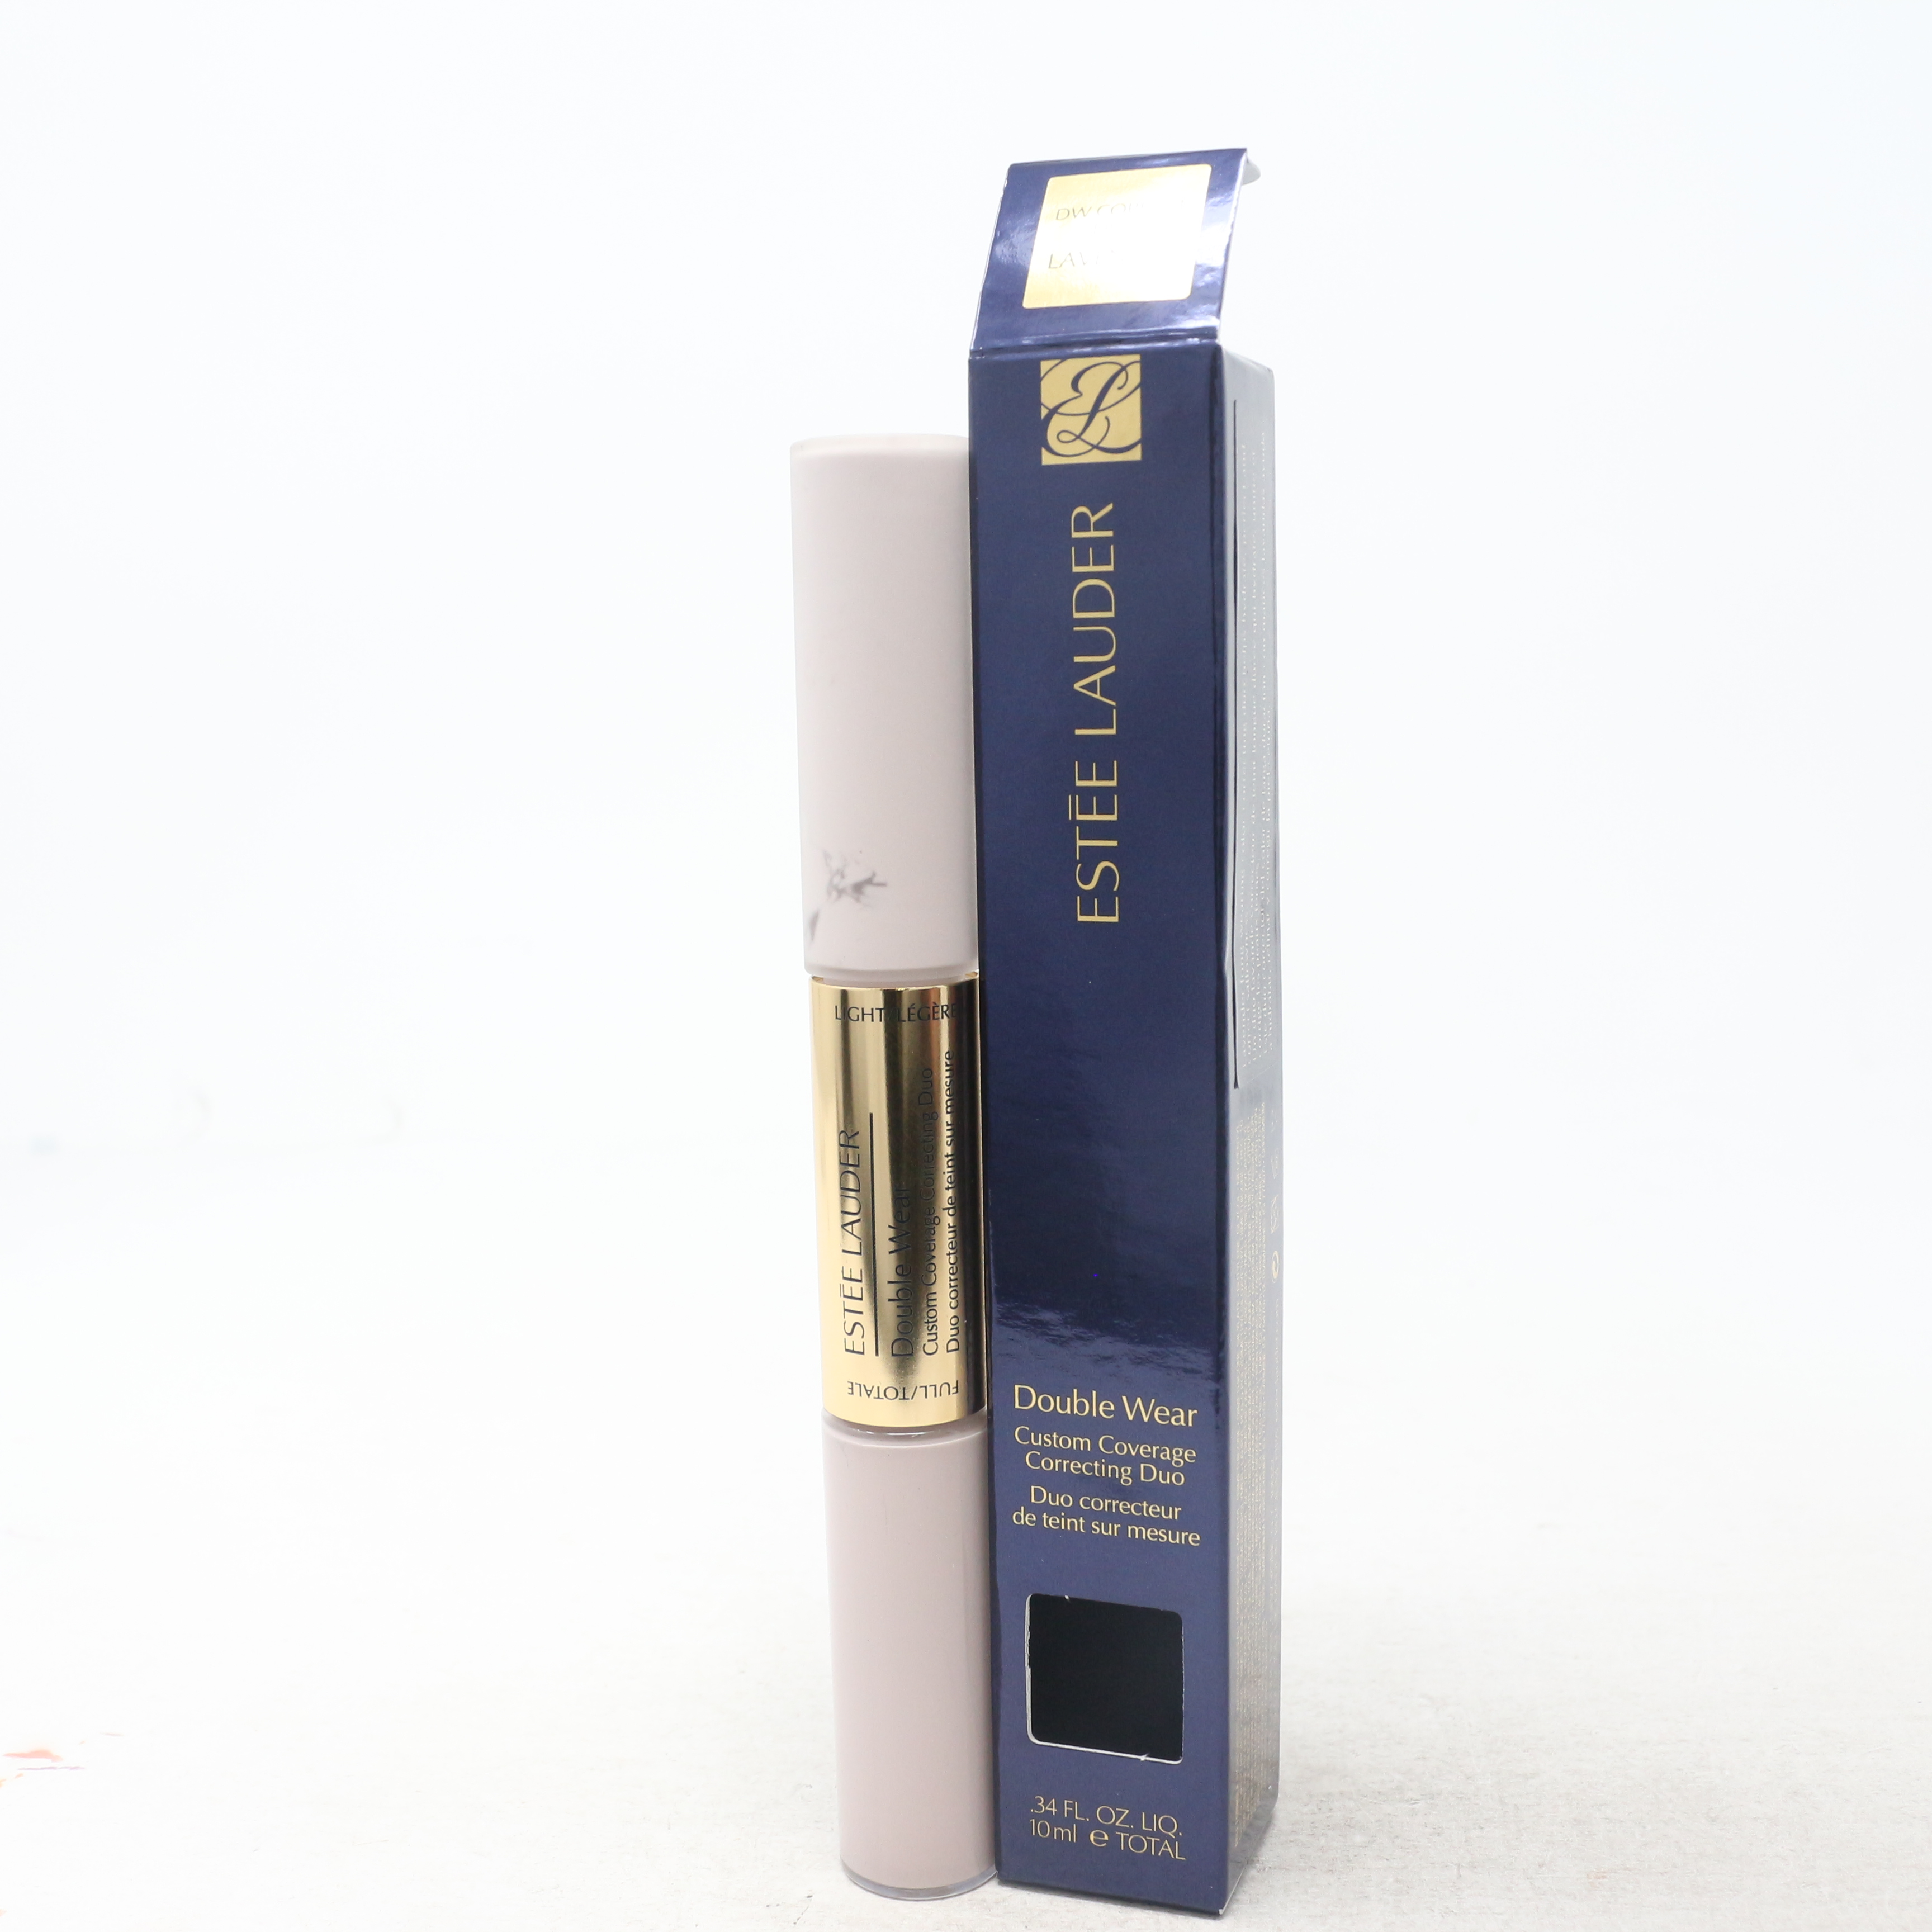 Estee Lauder Double Wear Custom Coverage Correcting Duo 0.34oz New With Box